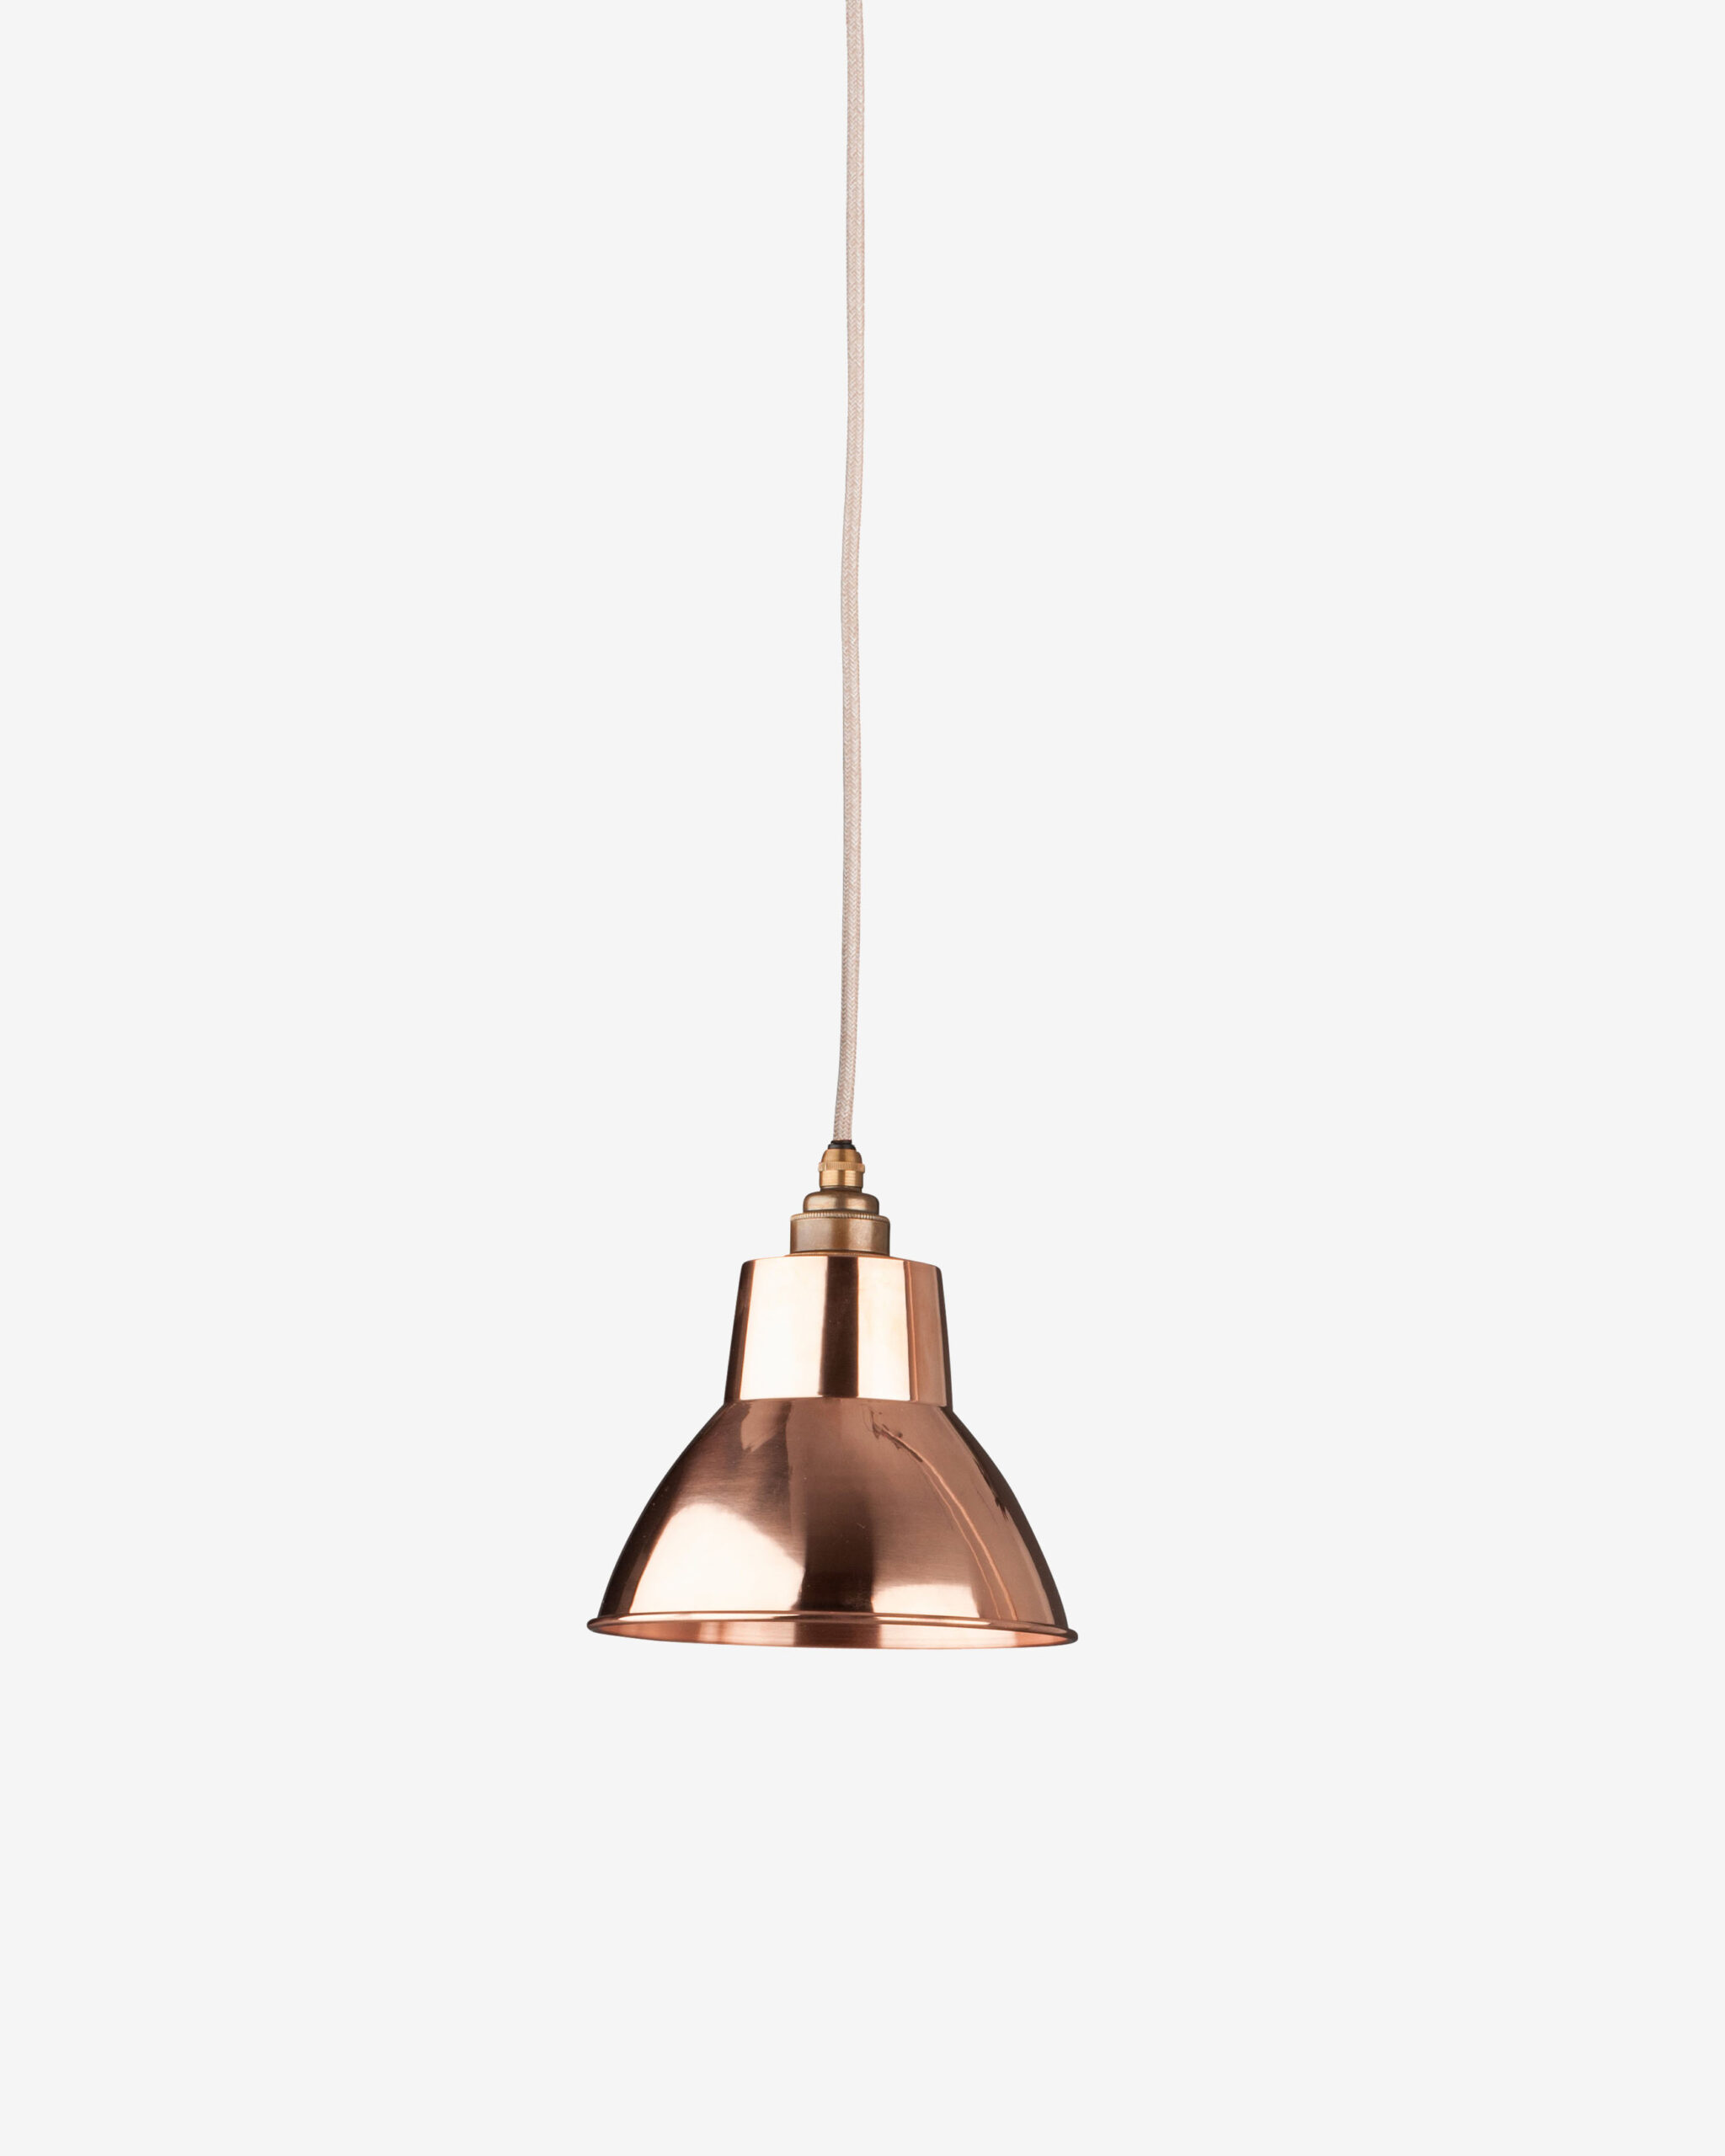 Moccas Industrial Pendant Light is shown here with a copper shade, but comes in a variety of finishes.